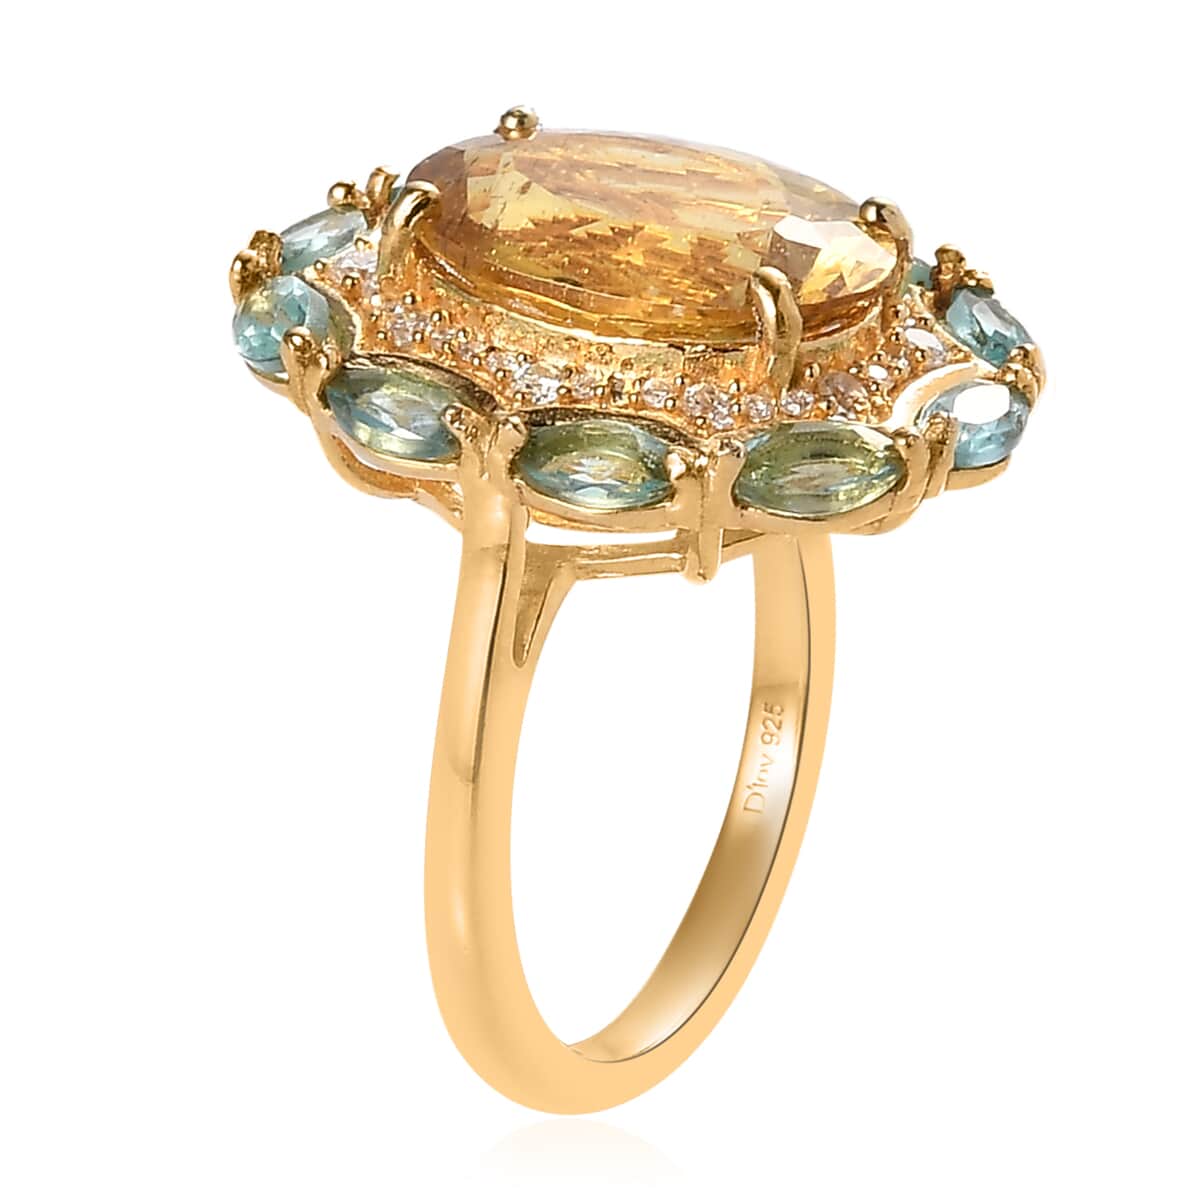 Premium Brazilian Golden Apatite and Multi Gemstone Ring in Vermeil Yellow Gold Over Sterling Silver 8.00 ctw (Delivery in 3-5 Business Days) image number 3